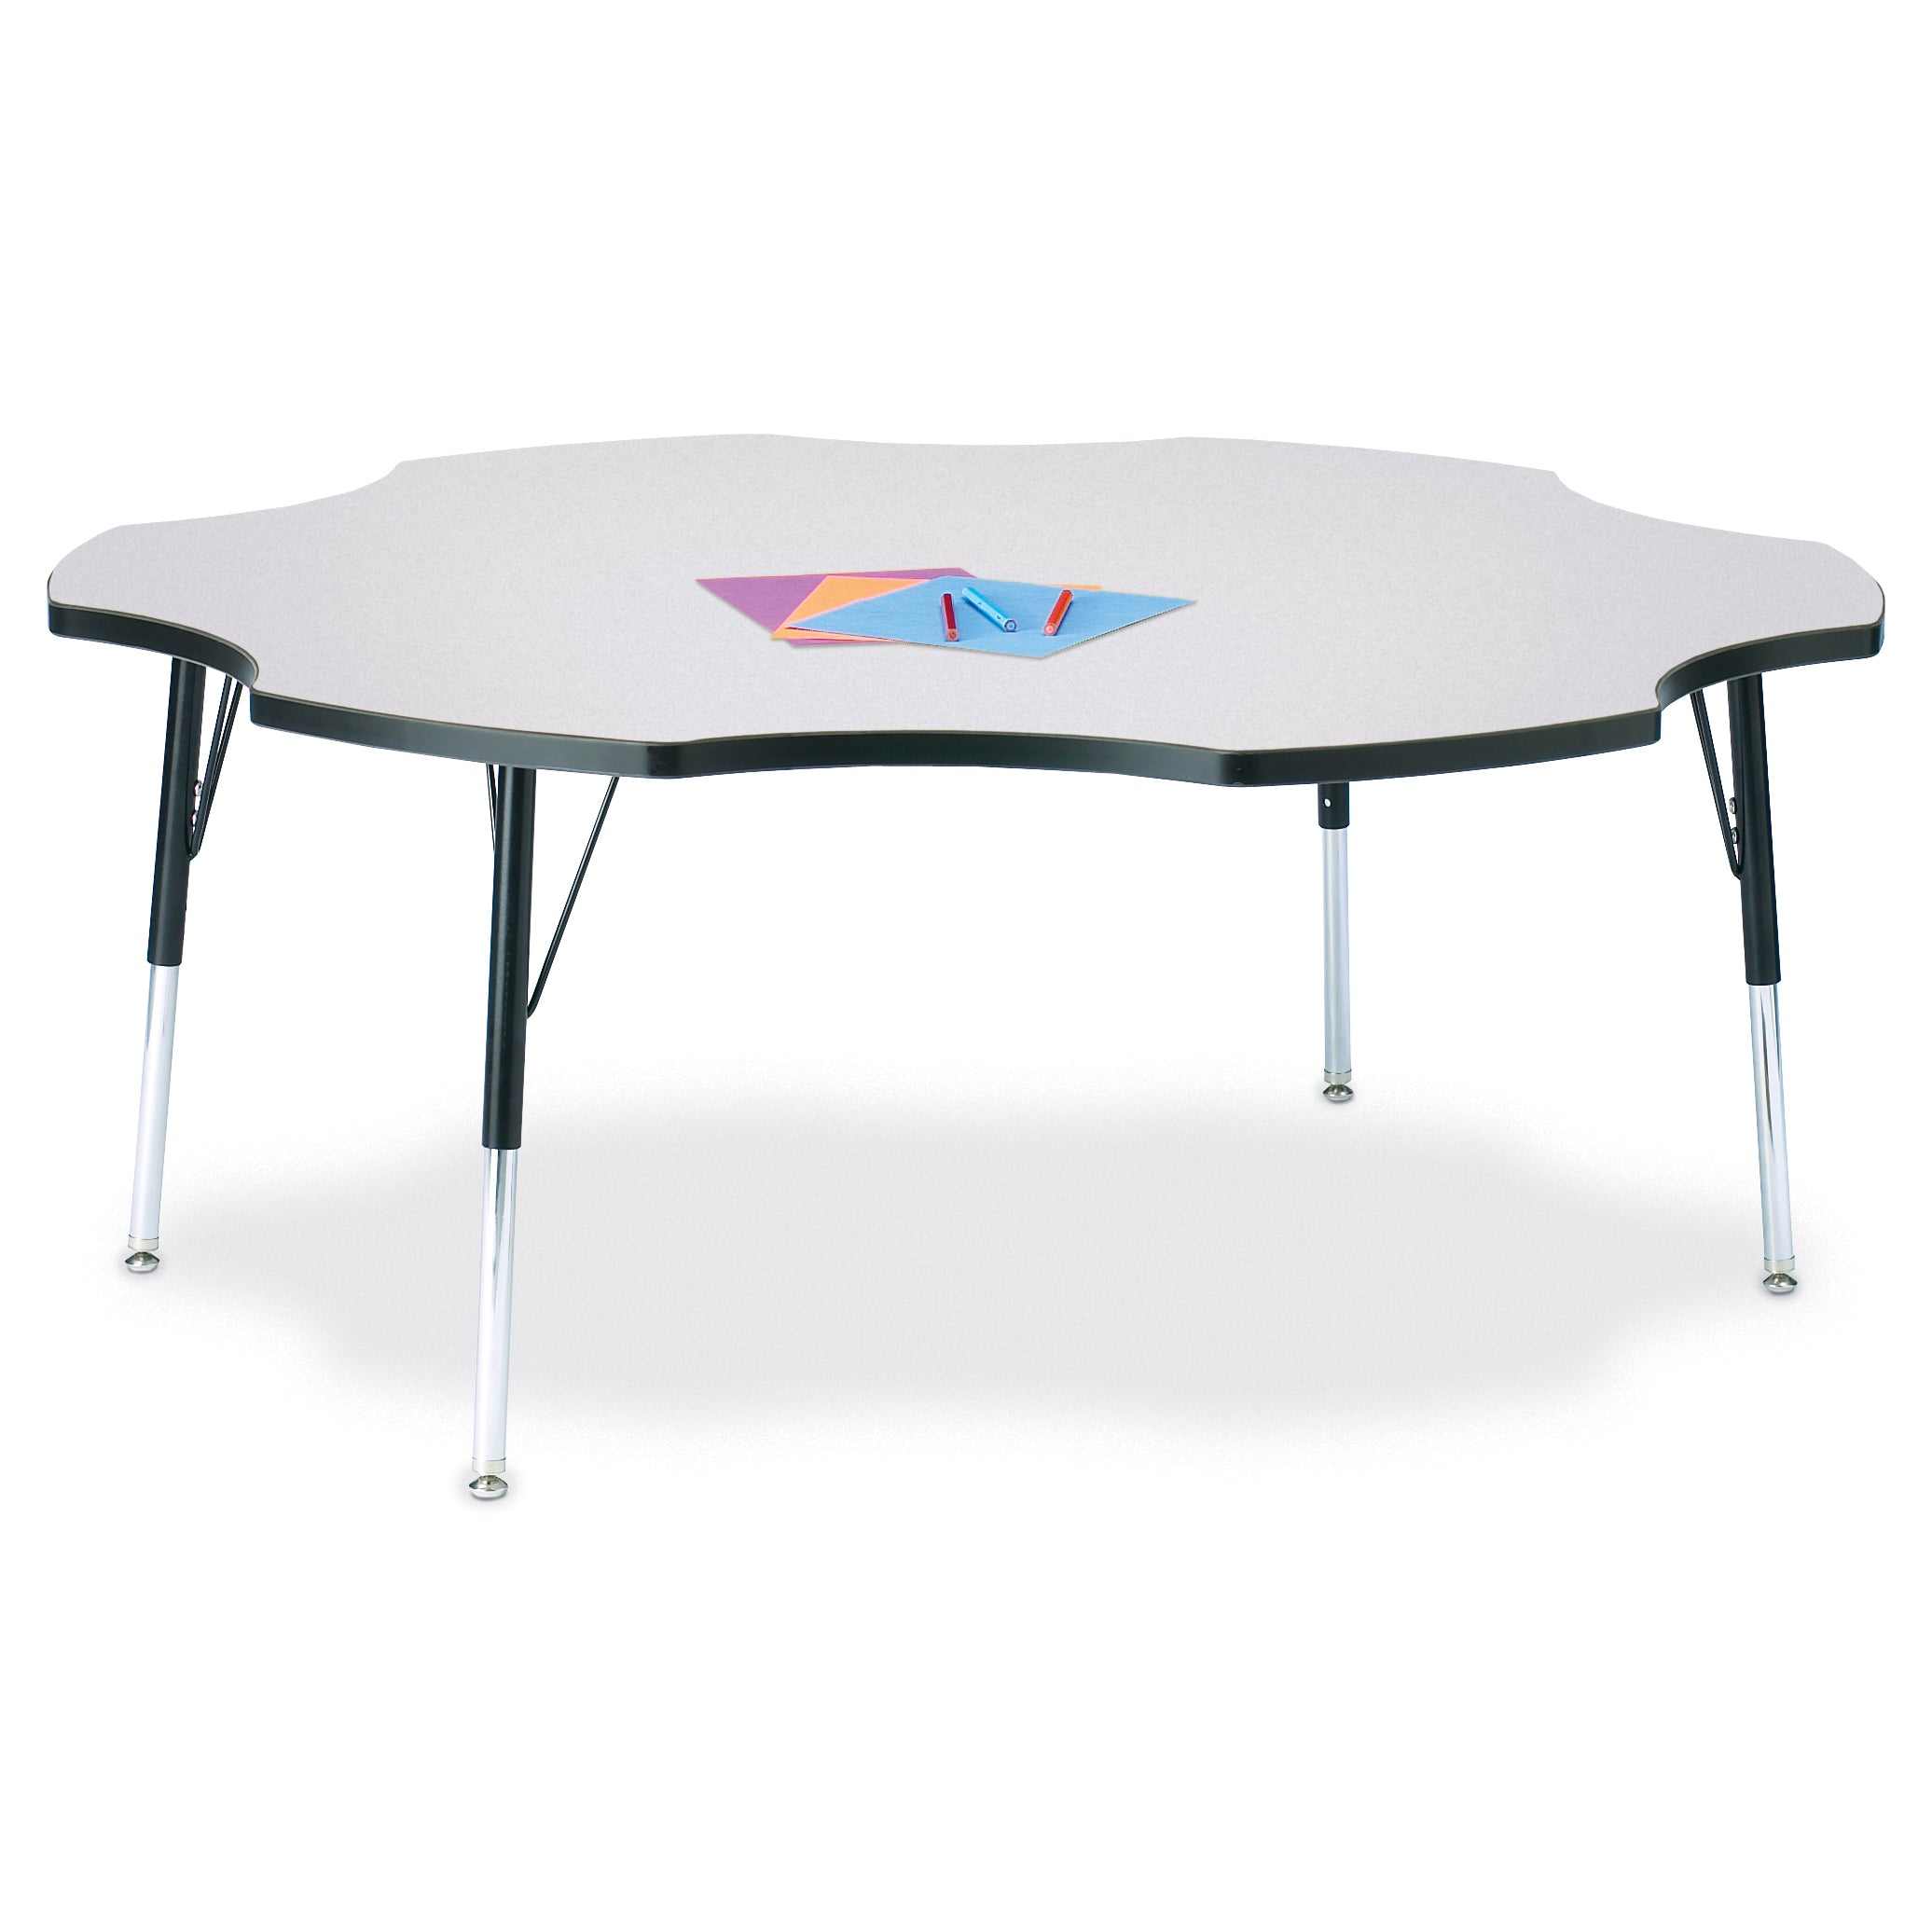 6458JCA180, Berries Six Leaf Activity Table - 60", A-height - Freckled Gray/Black/Black